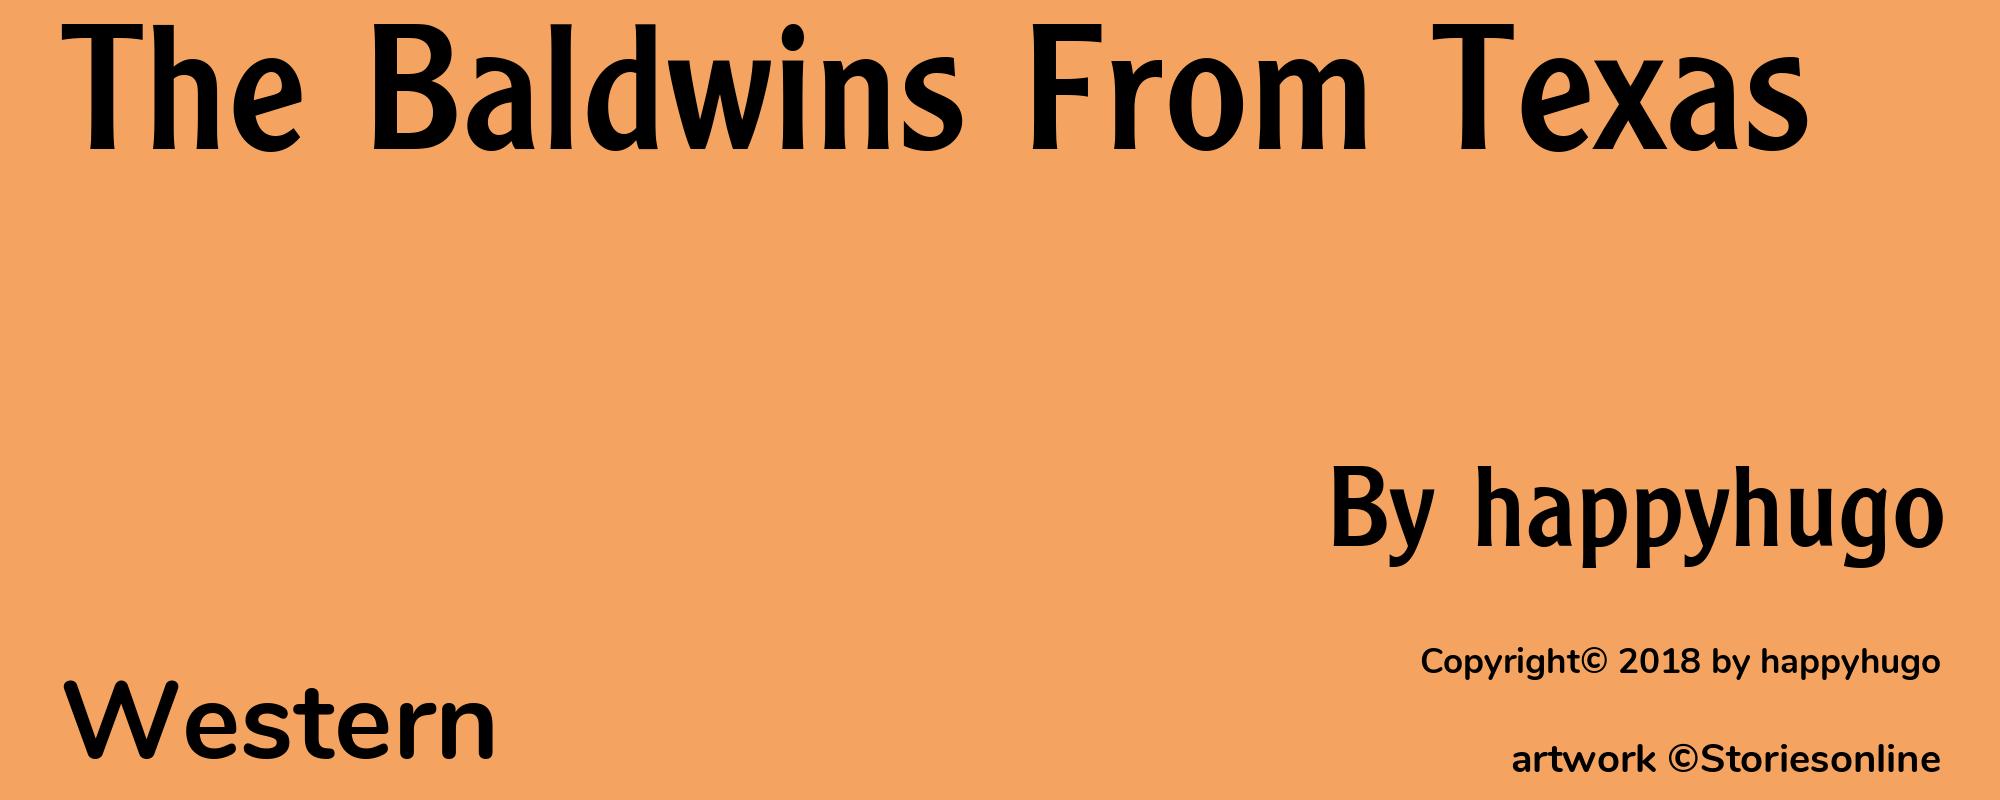 The Baldwins From Texas - Cover